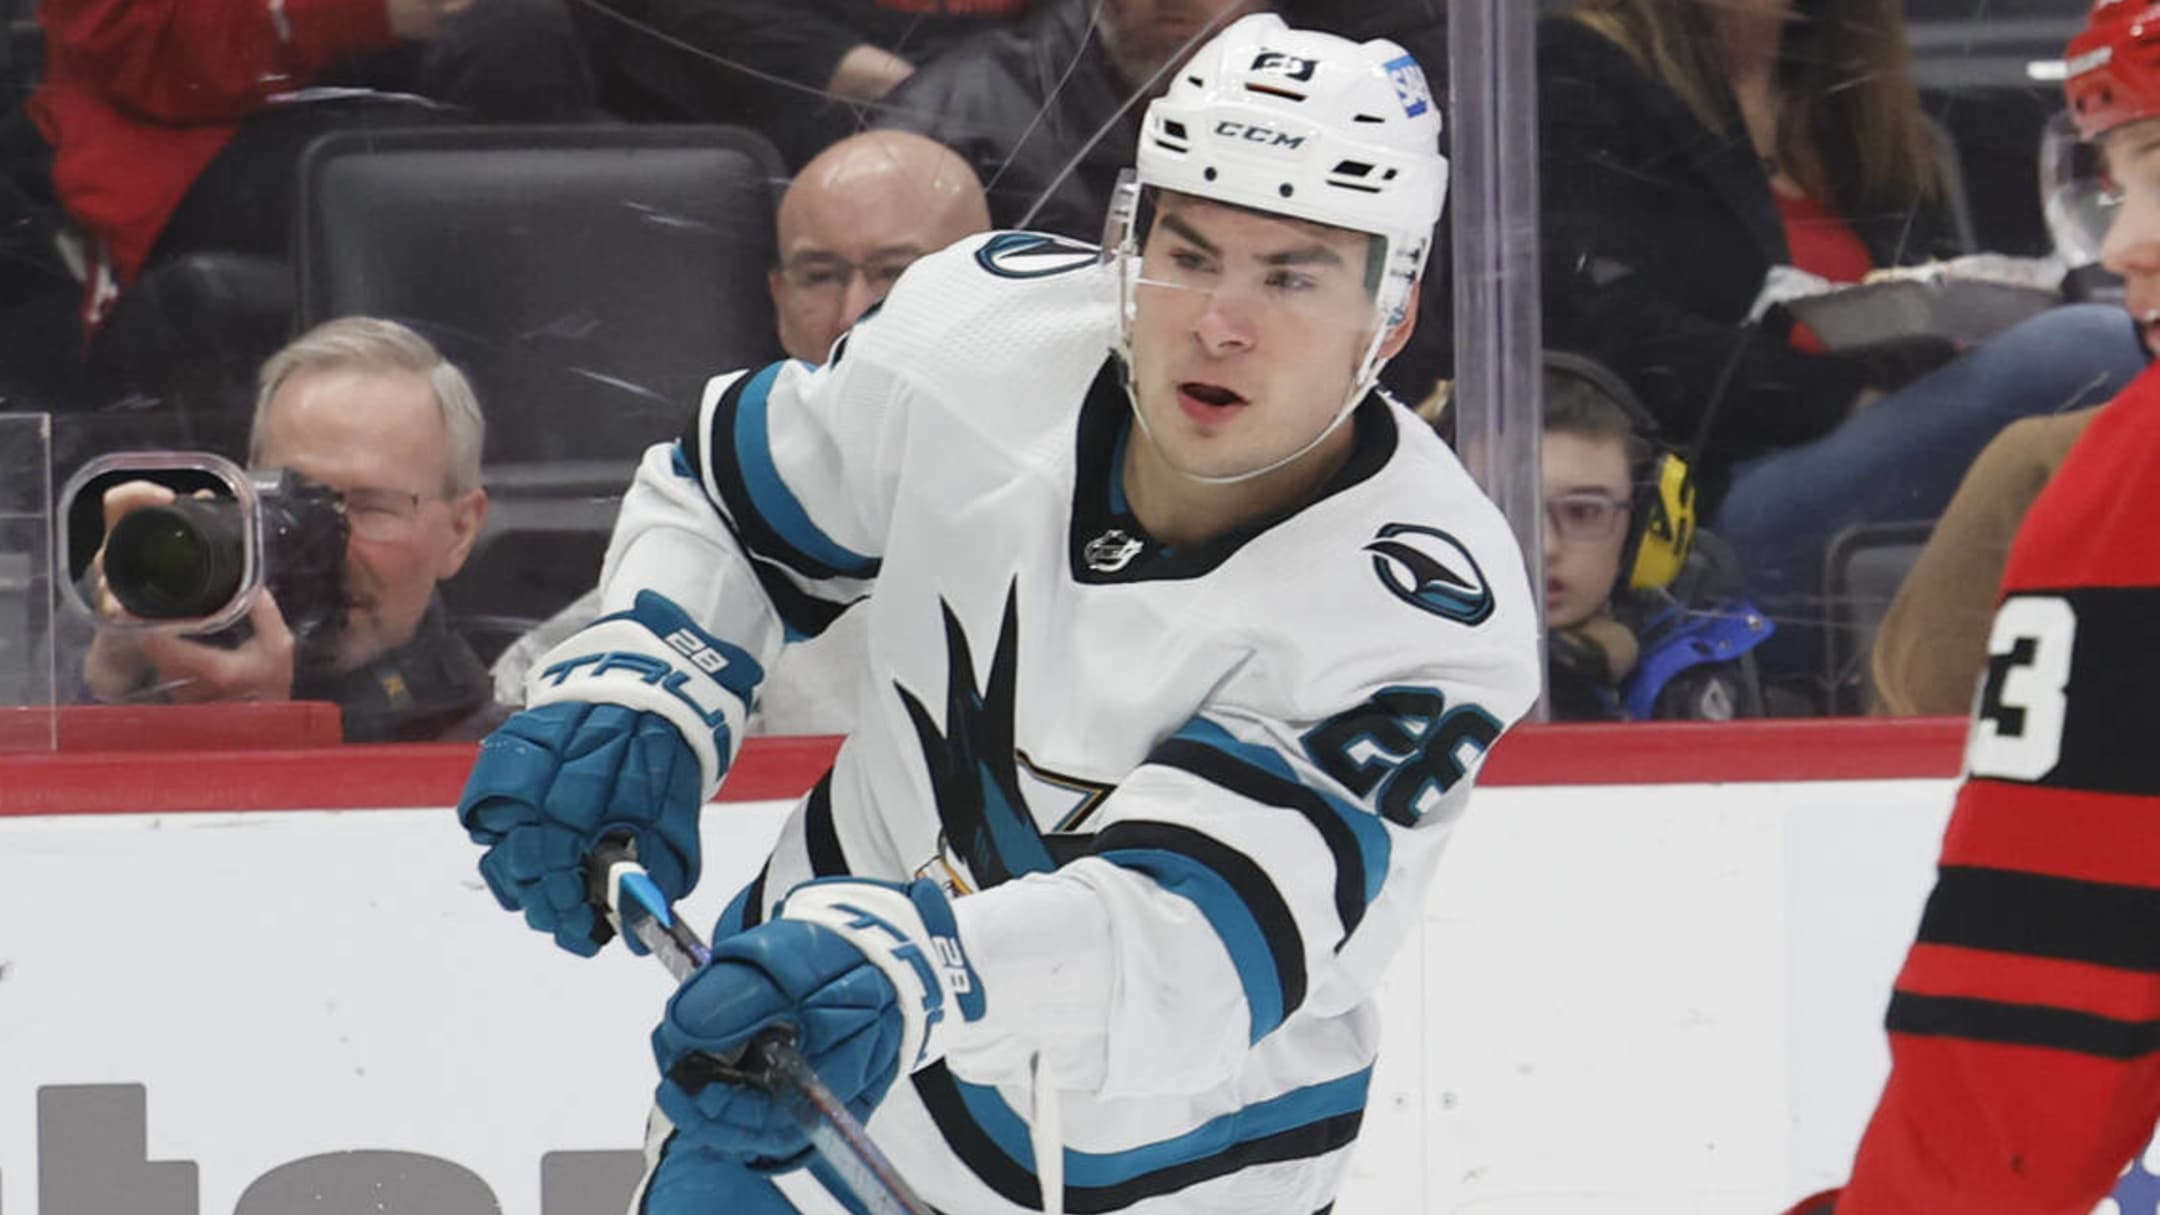 Sharks' Timo Meier is the new No. 1 on Daily Faceoff's Trade